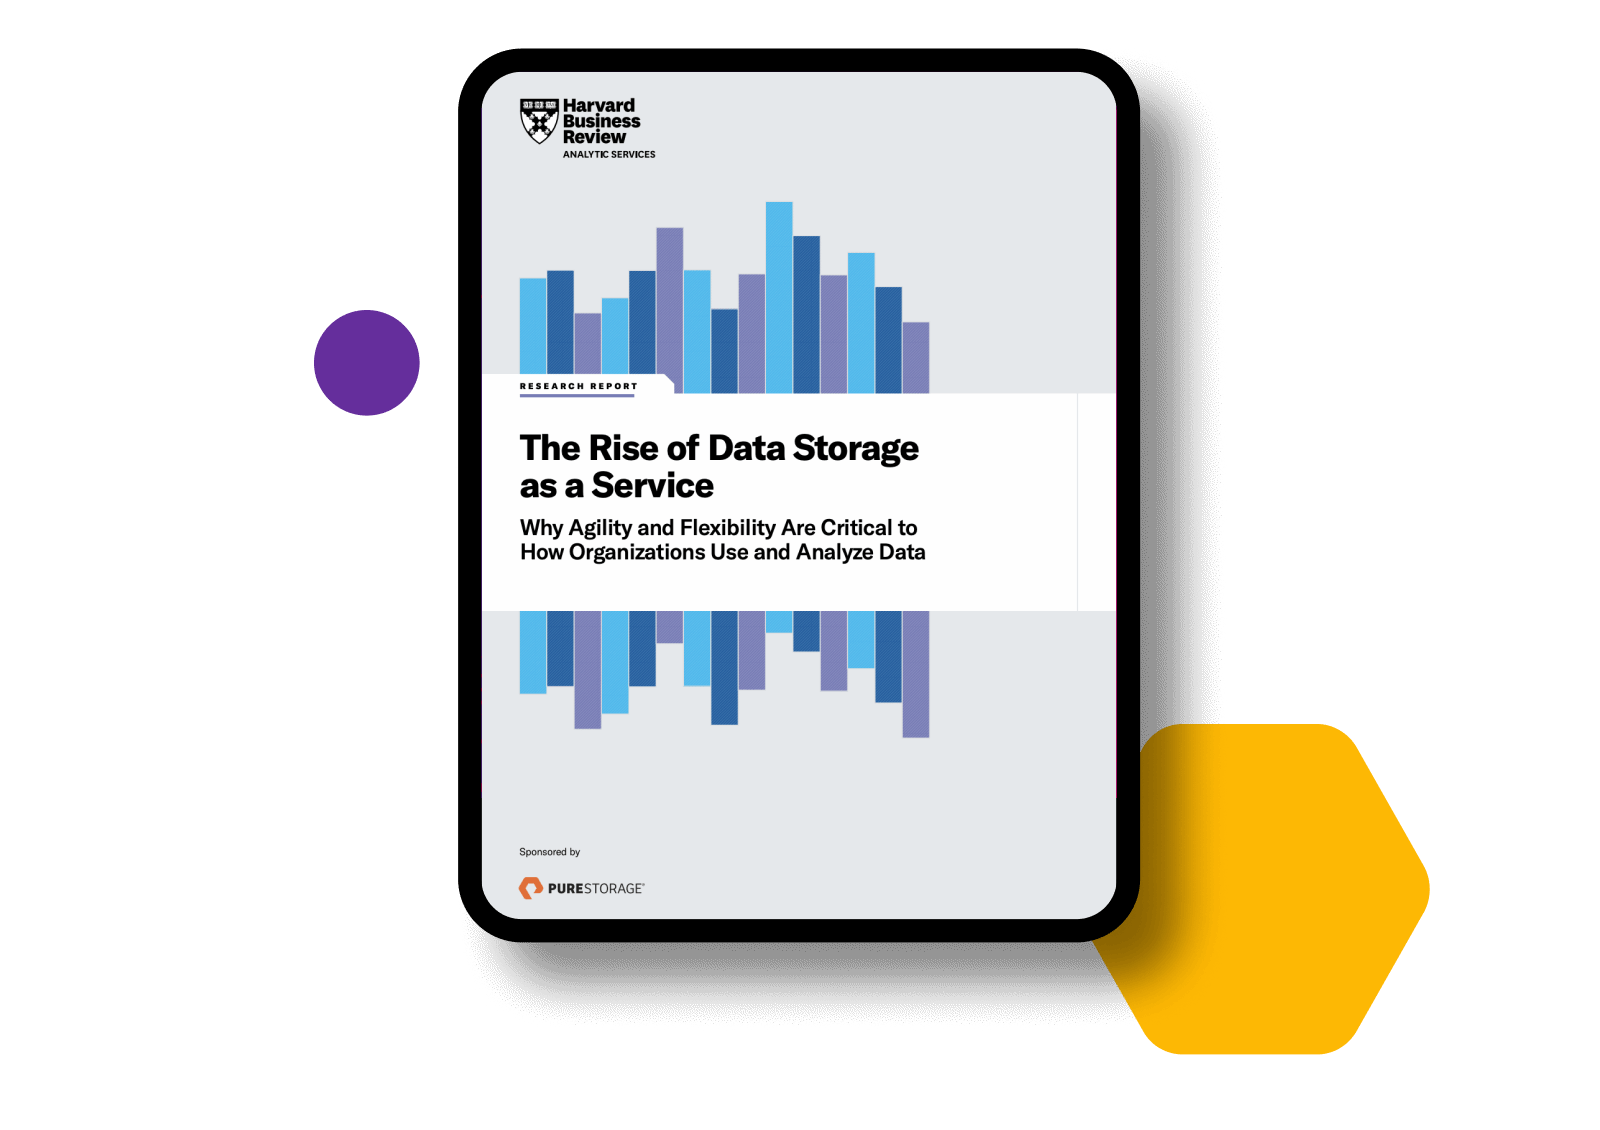 The Rise of Data Storage as a Service